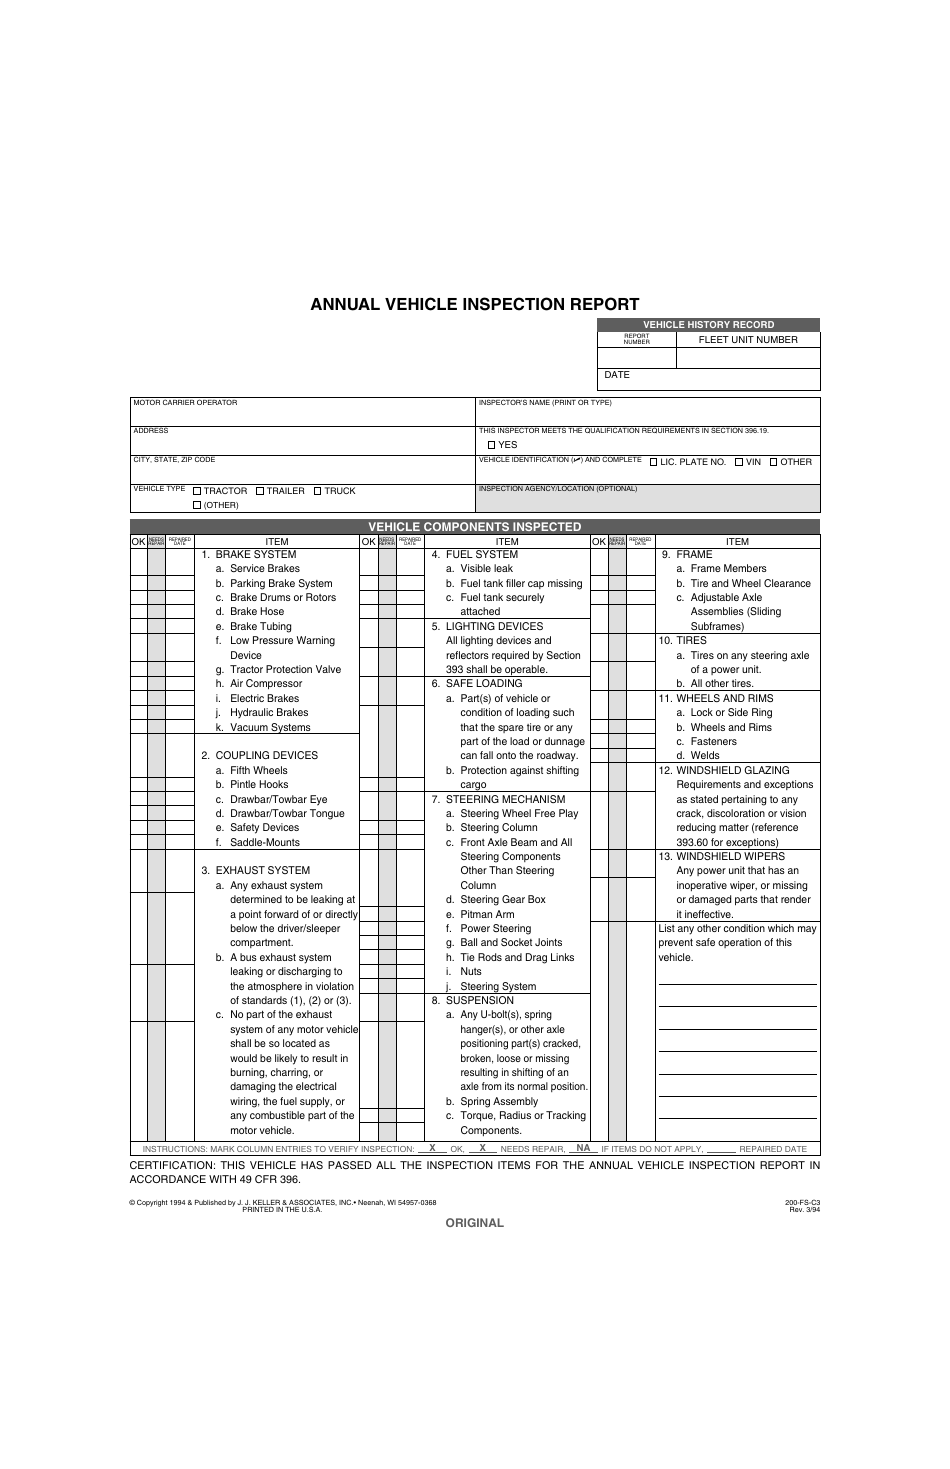 Form 200-FS-C3 Annual Vehicle Inspection Report, Page 1